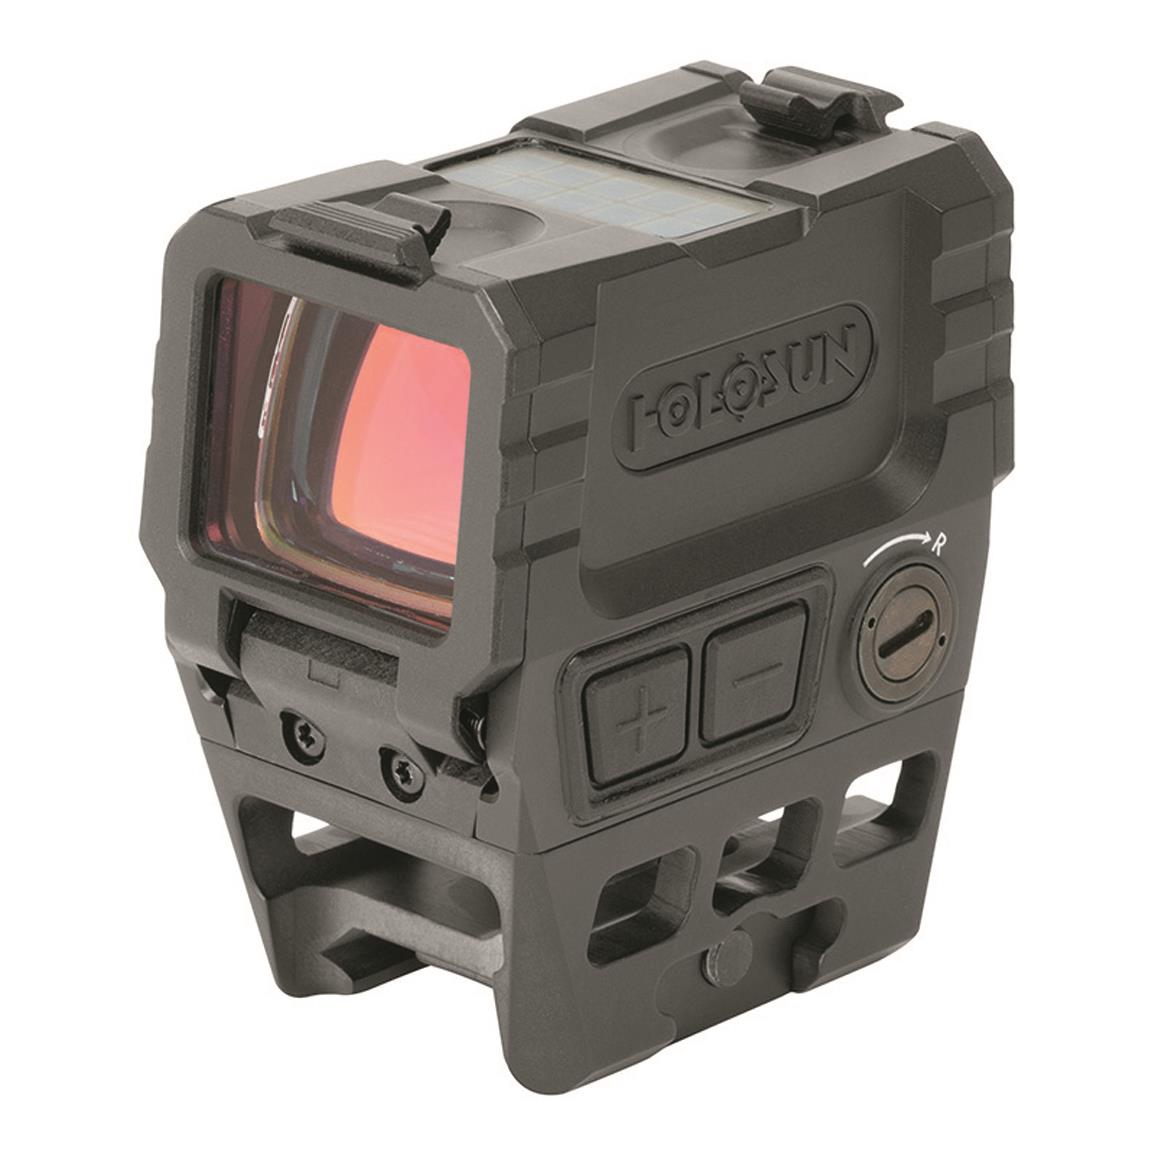 Holosun AEMS Enclosed Reflex Sight, Red Multi-Reticle System